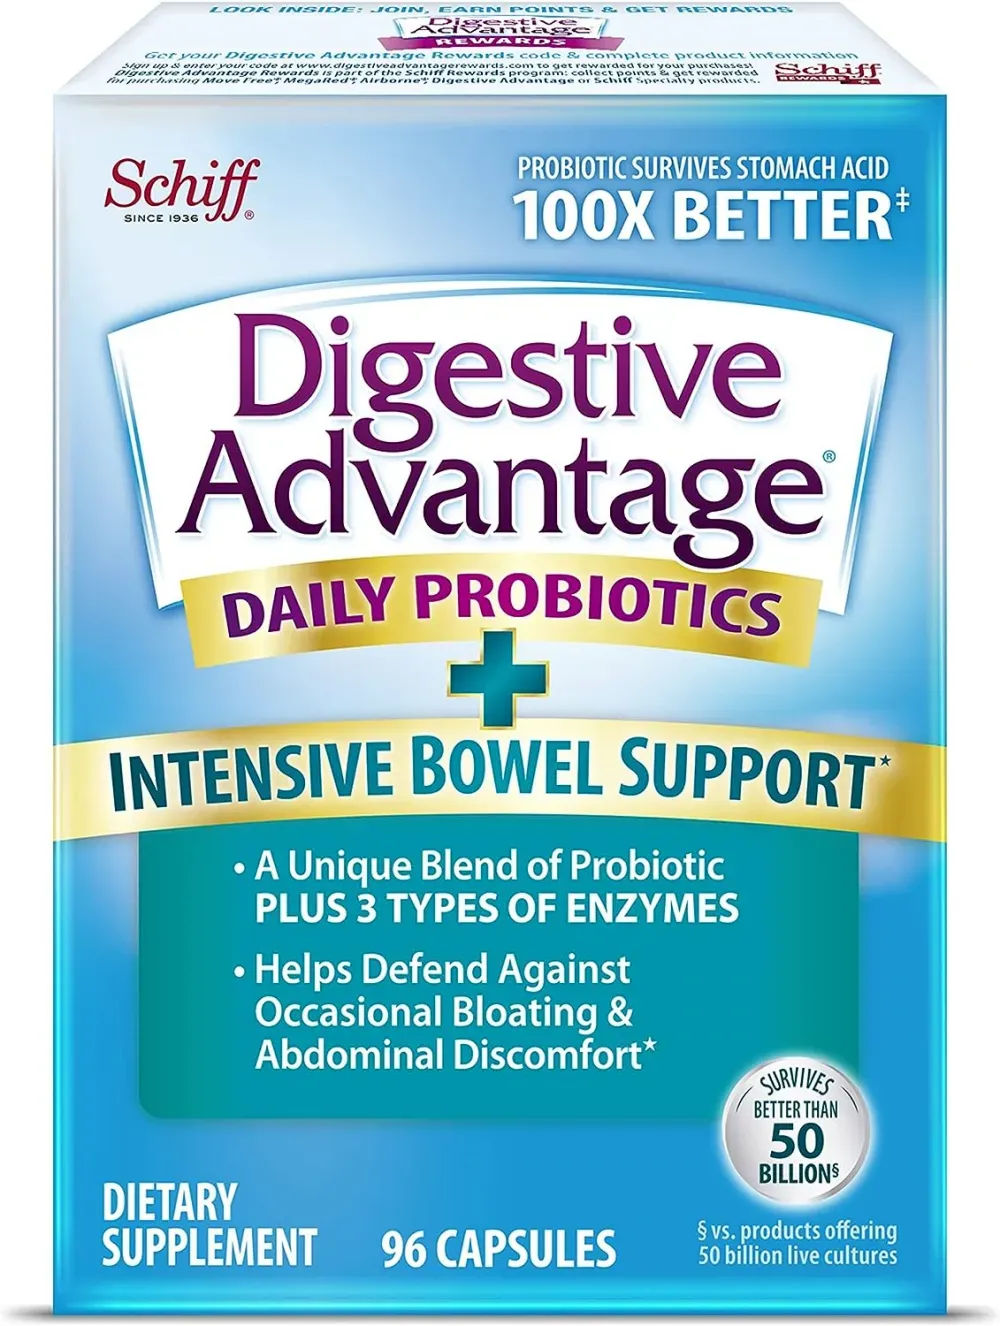 IBS Relief is Just a Click Away: Discover the Best Probiotics Now